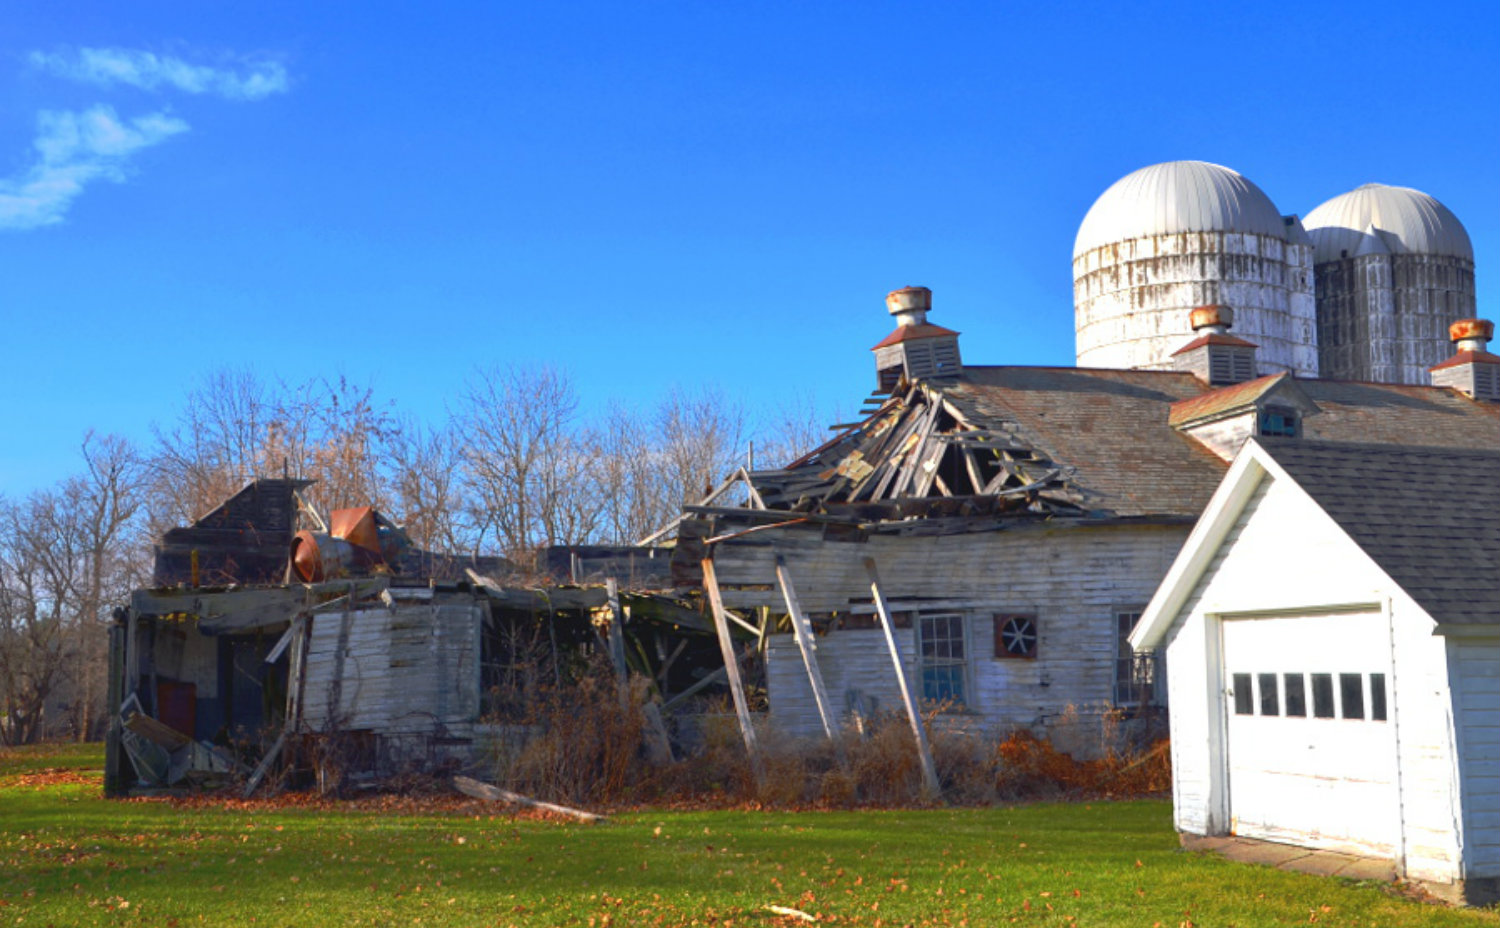 Clifton Springs Sanitarium Company Barn in Clifton Springs, NY - Featured Image